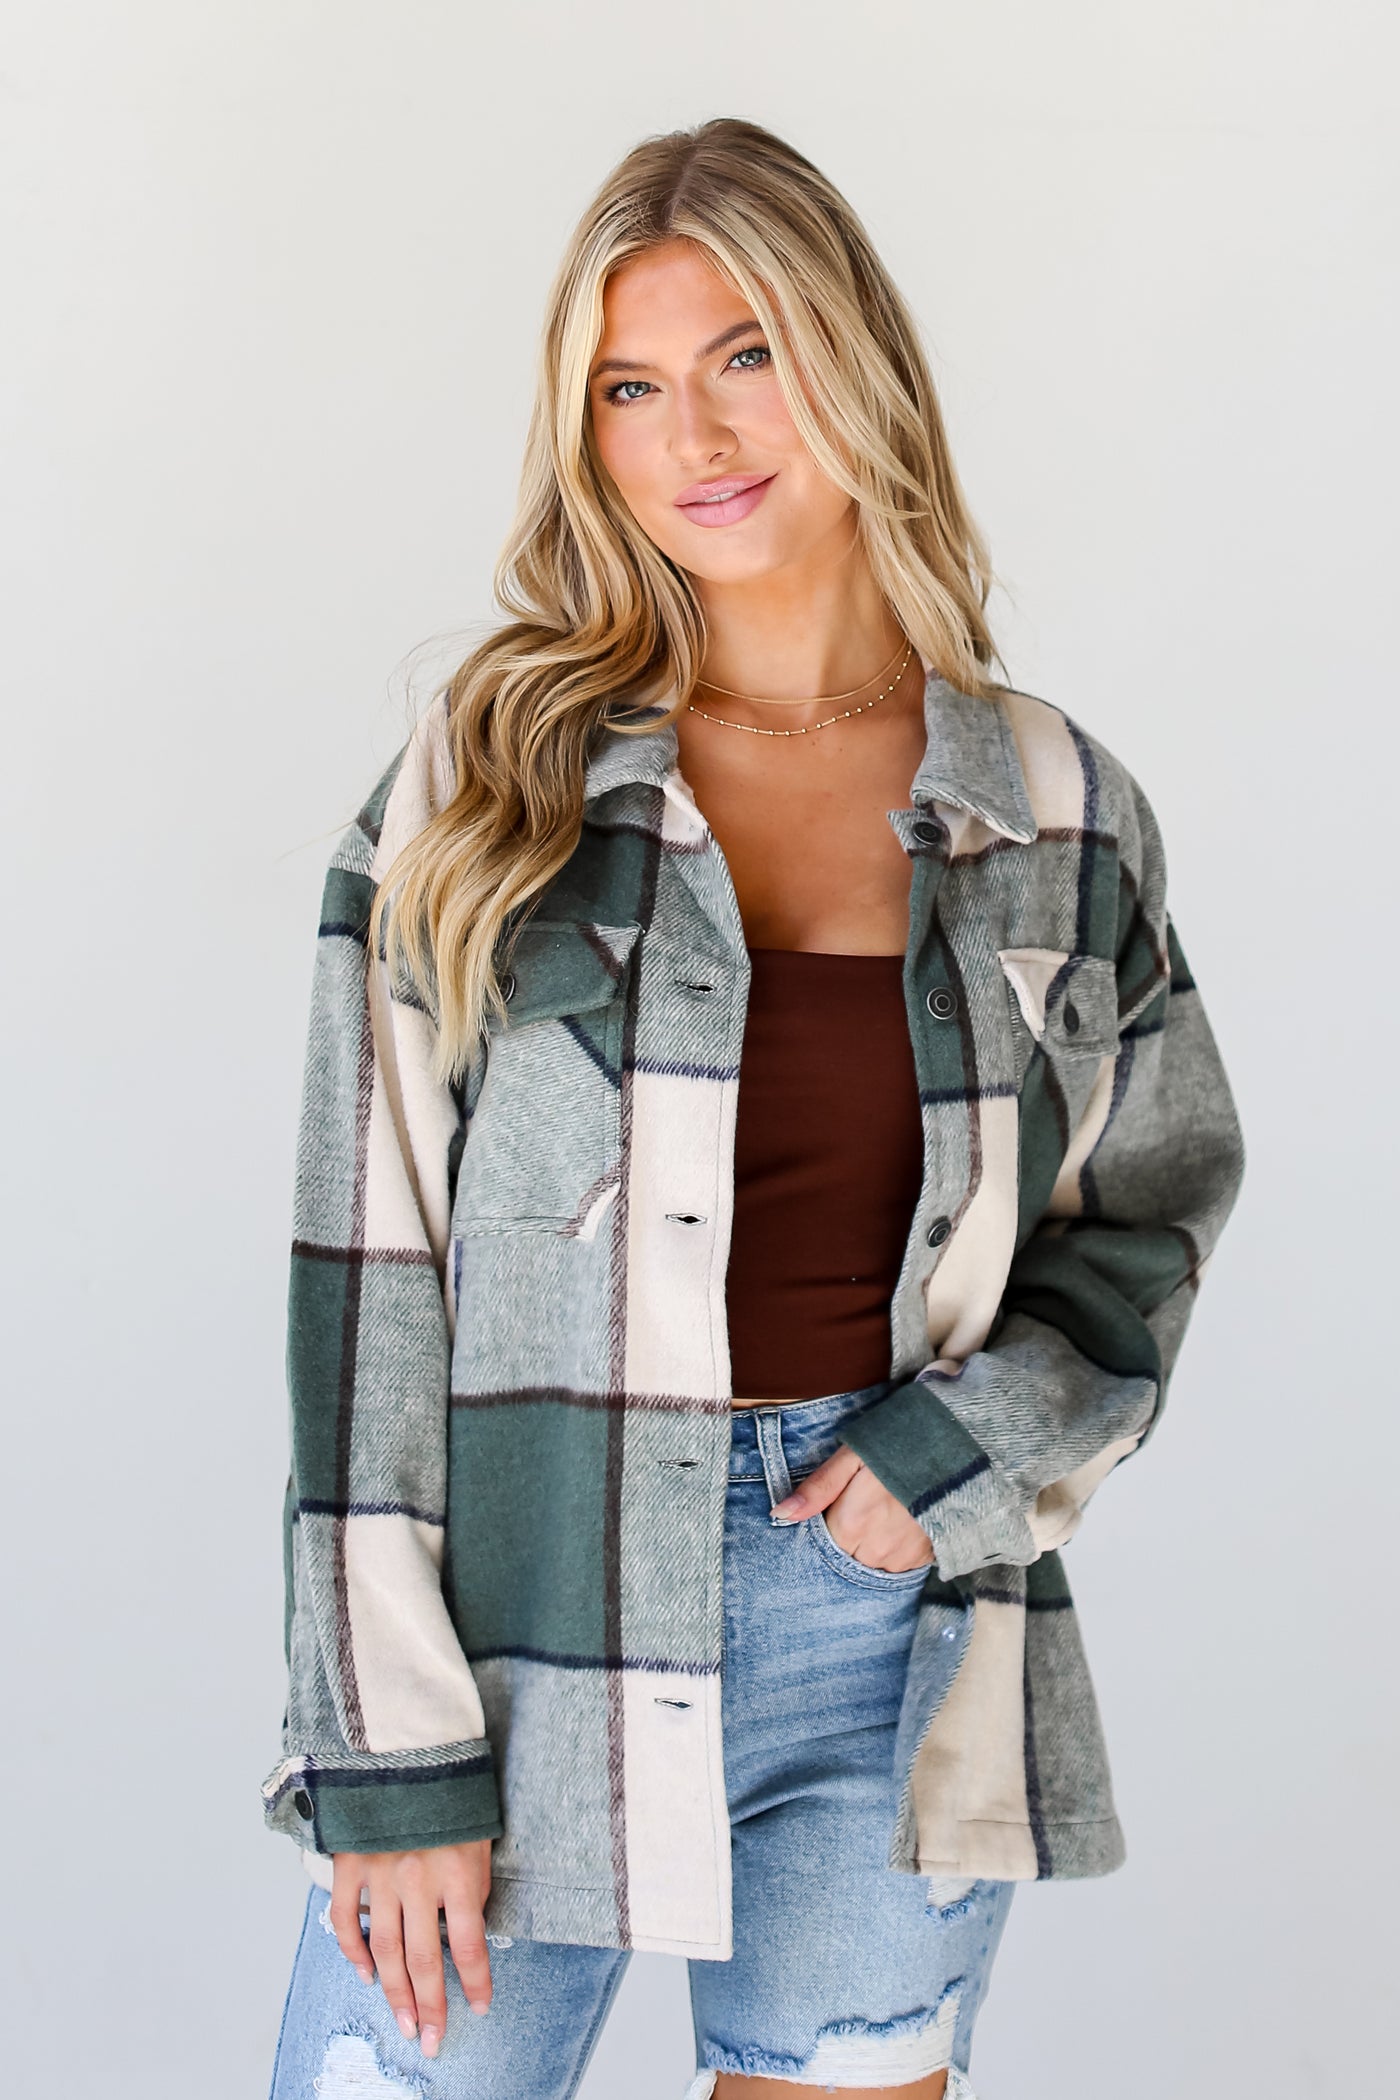 sage Plaid Shacket front view